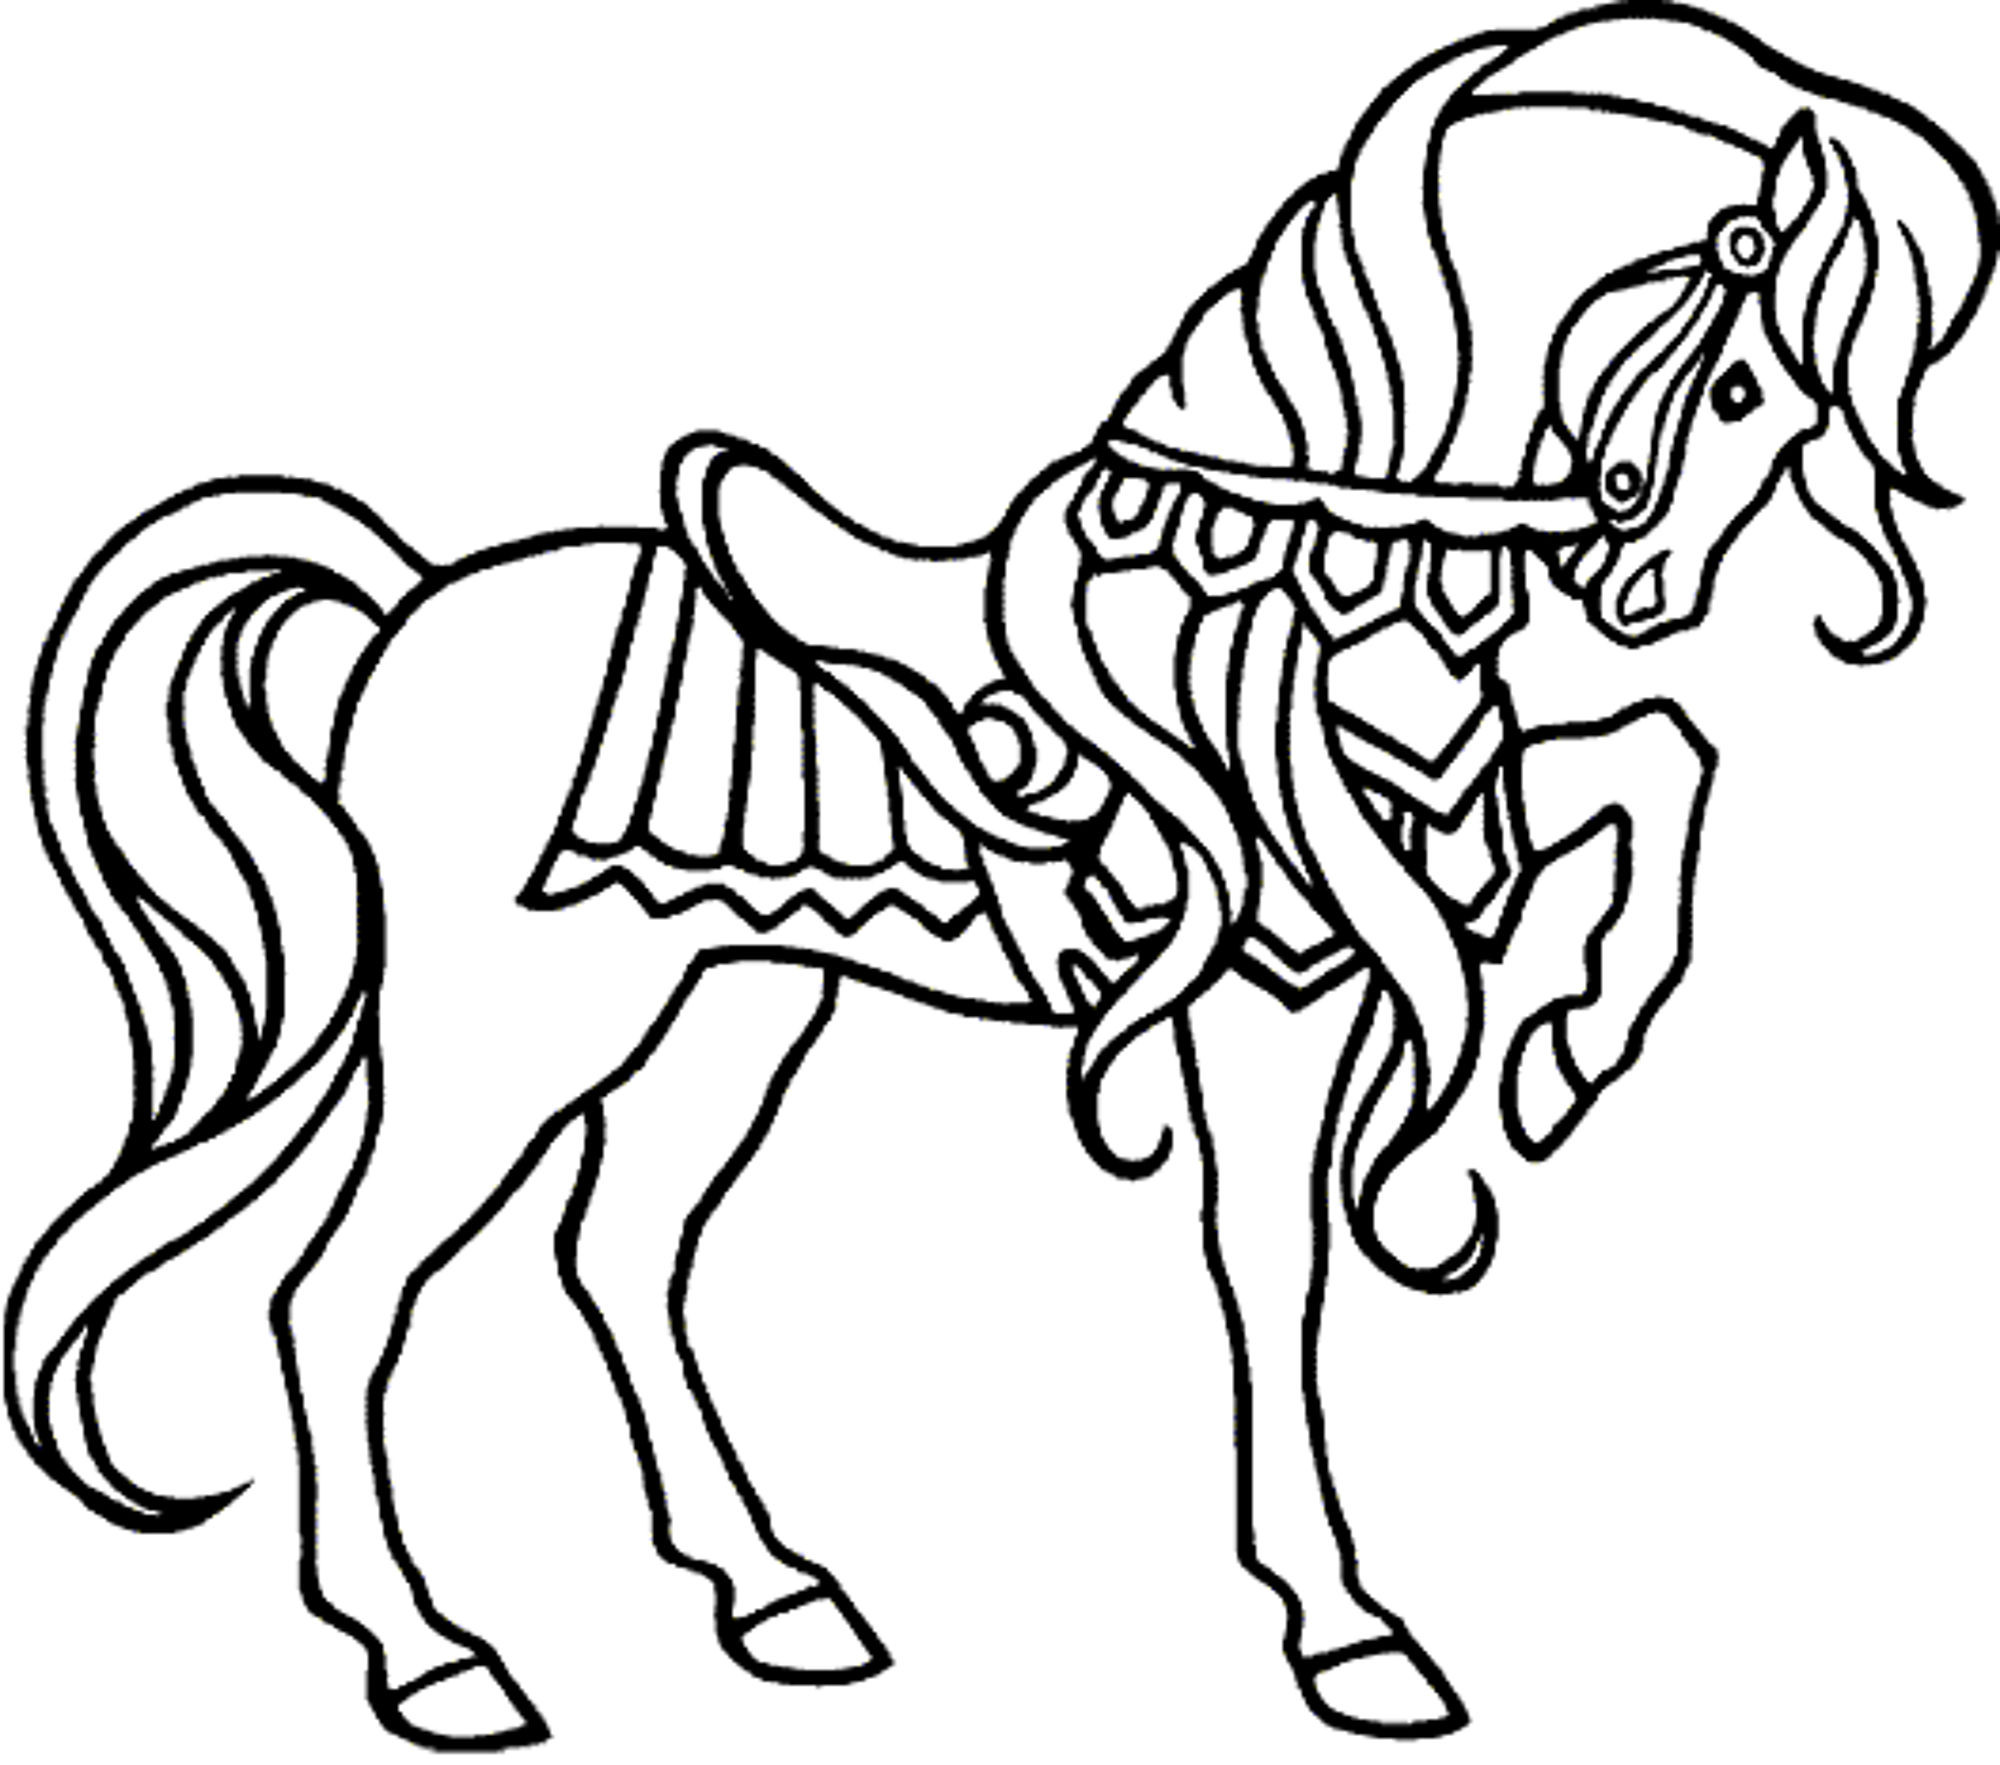 Coloring Pages For Girls Horses
 coloring pages for girls horses free